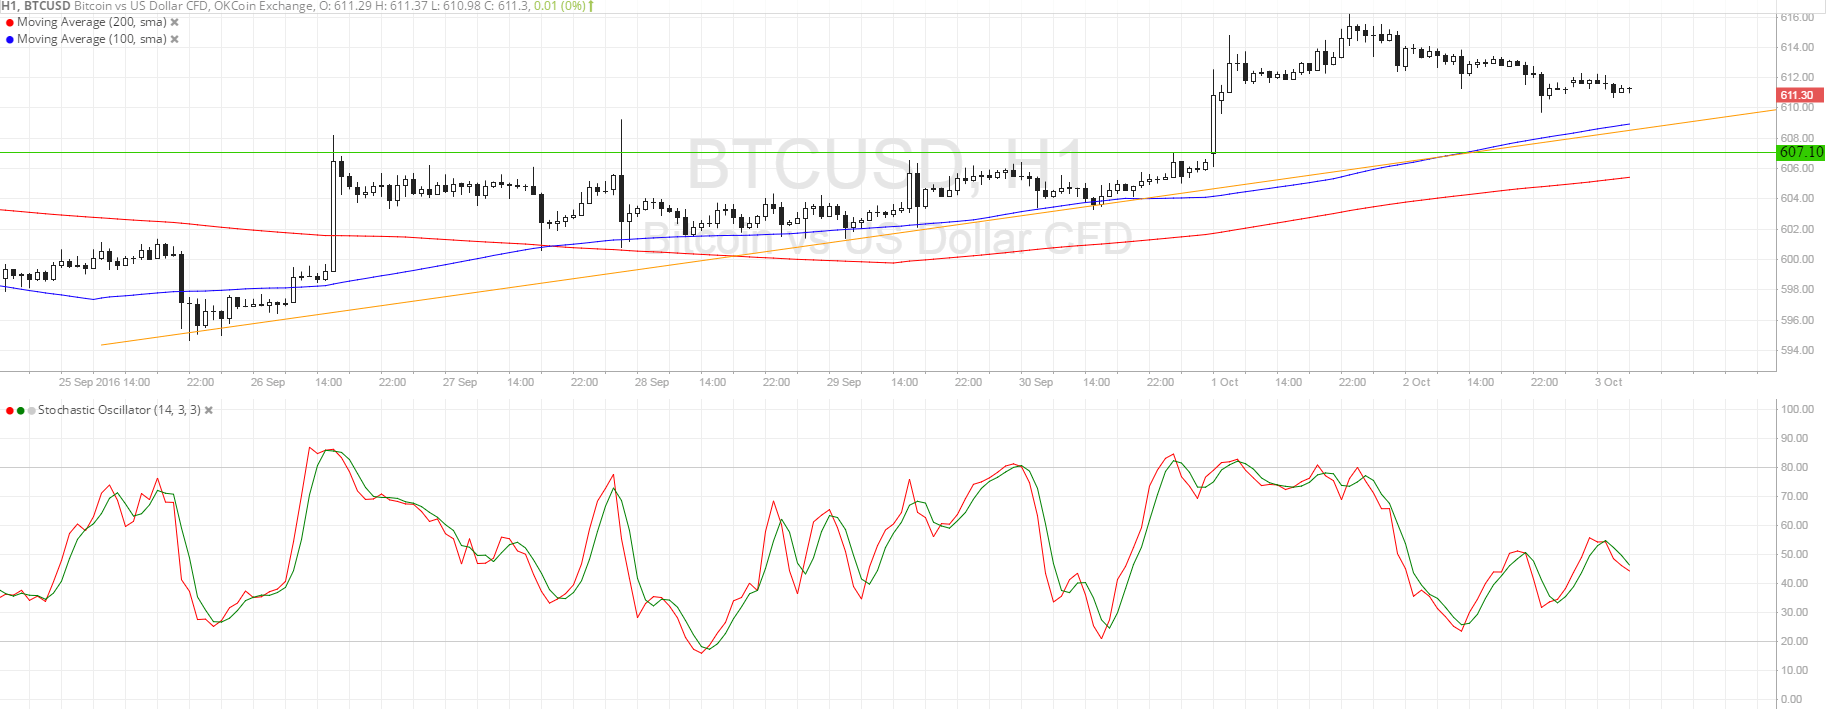 Bitcoin Price Technical Analysis for 10/03/2016 - Time for Another Pullback?